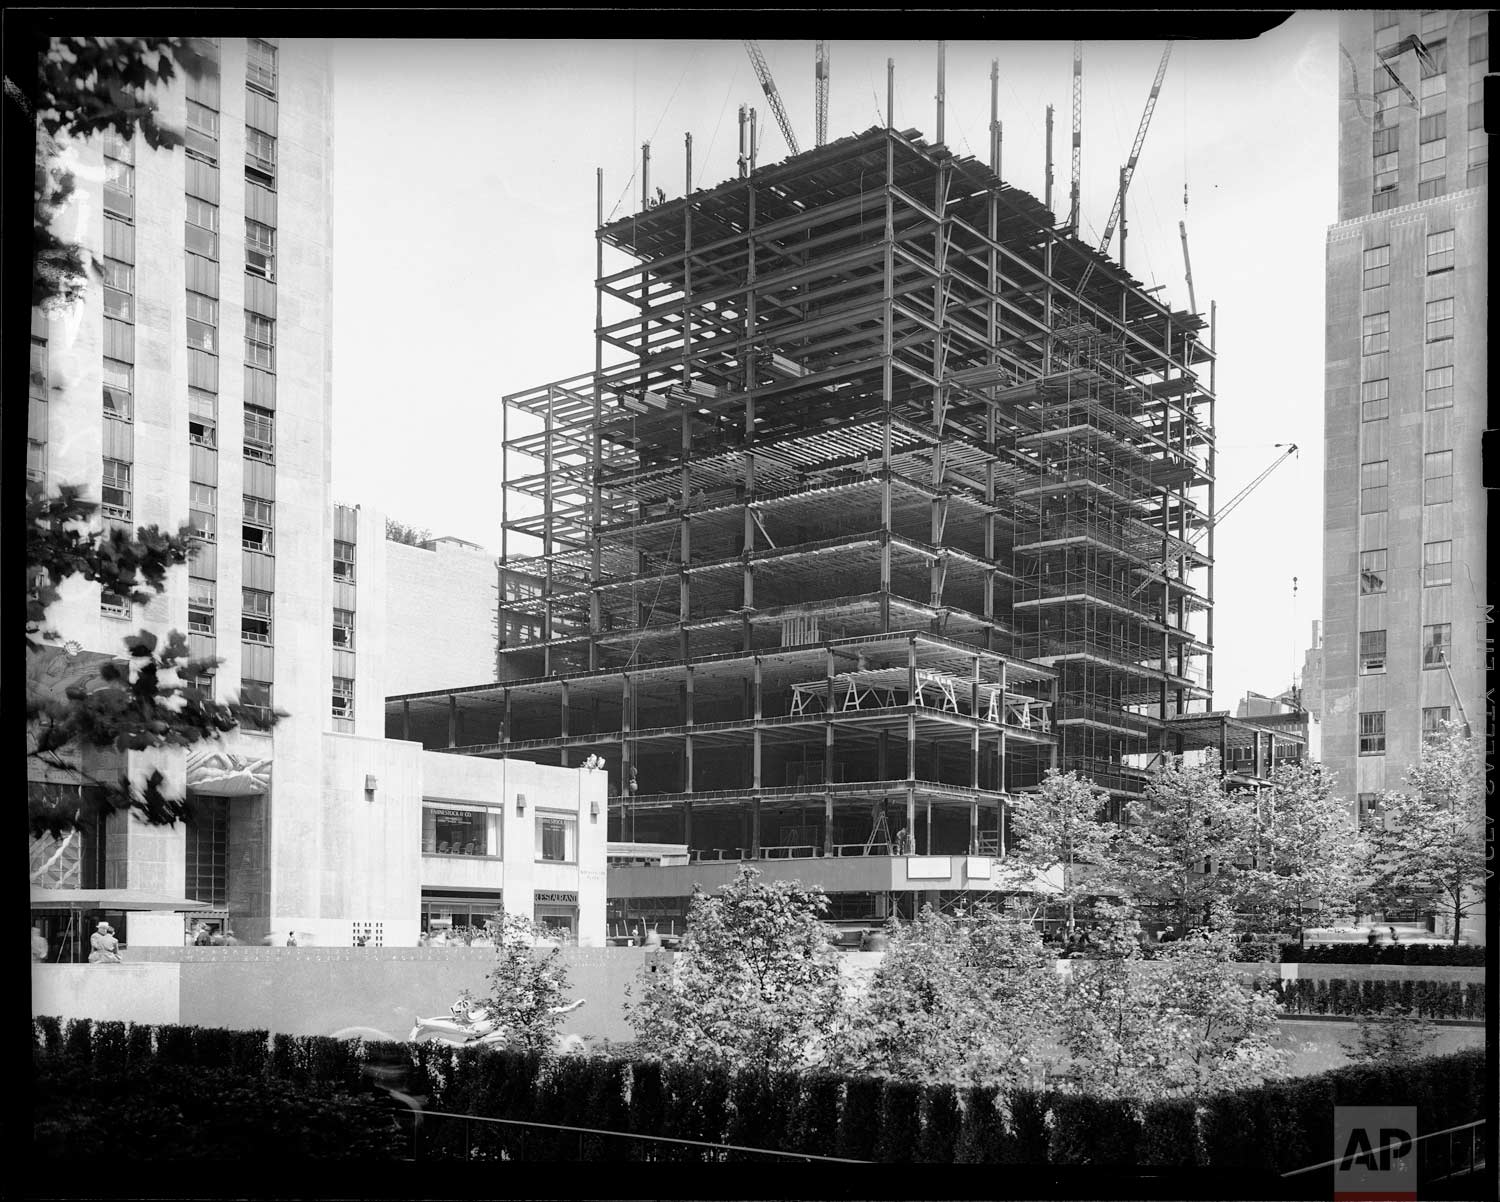  The swiftly growing steel skeleton of the new Associated Press building is shown under construction at Rockefeller Center, New York, June 10, 1938. (AP Photo/Corporate Archives/Joseph W. Brady) 